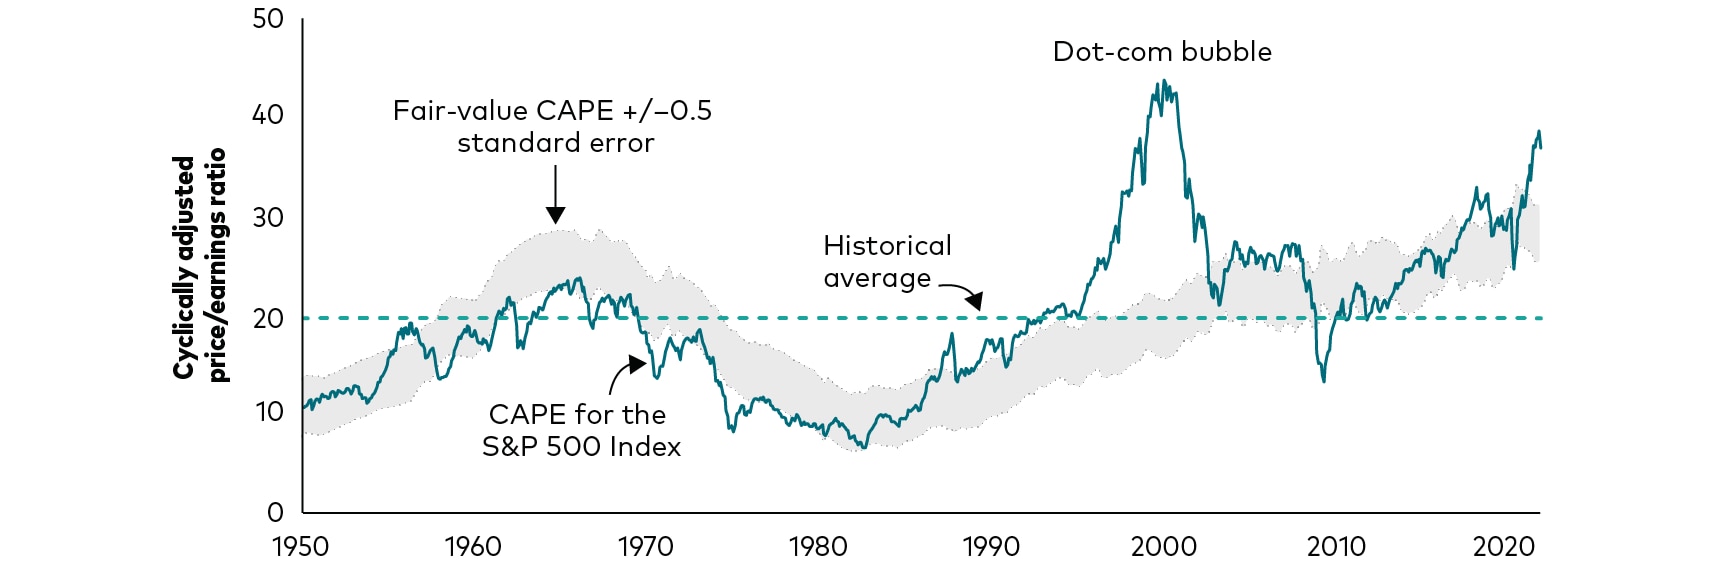 A line graph shows the wide fluctuations in the cyclically adjusted price/earnings ratio, or CAPE, for the Standard and Poor’s 500 Index from 1950 to late 2021. It also shows the historical average CAPE of about 20. Finally, it shows a fluctuating range of Vanguard estimates of a separate, fair-value CAPE measurement. The graph shows that the index’s CAPE valuation has typically hovered in or near our estimates of the fair-value CAPE. It also highlights the early-2000 valuation peak amid the dot-com bubble and the deviation at that time between valuations and fair valuations. The valuation of the stock index and its deviation from fair value in late 2021 were at their highest levels since the dot-com peak.